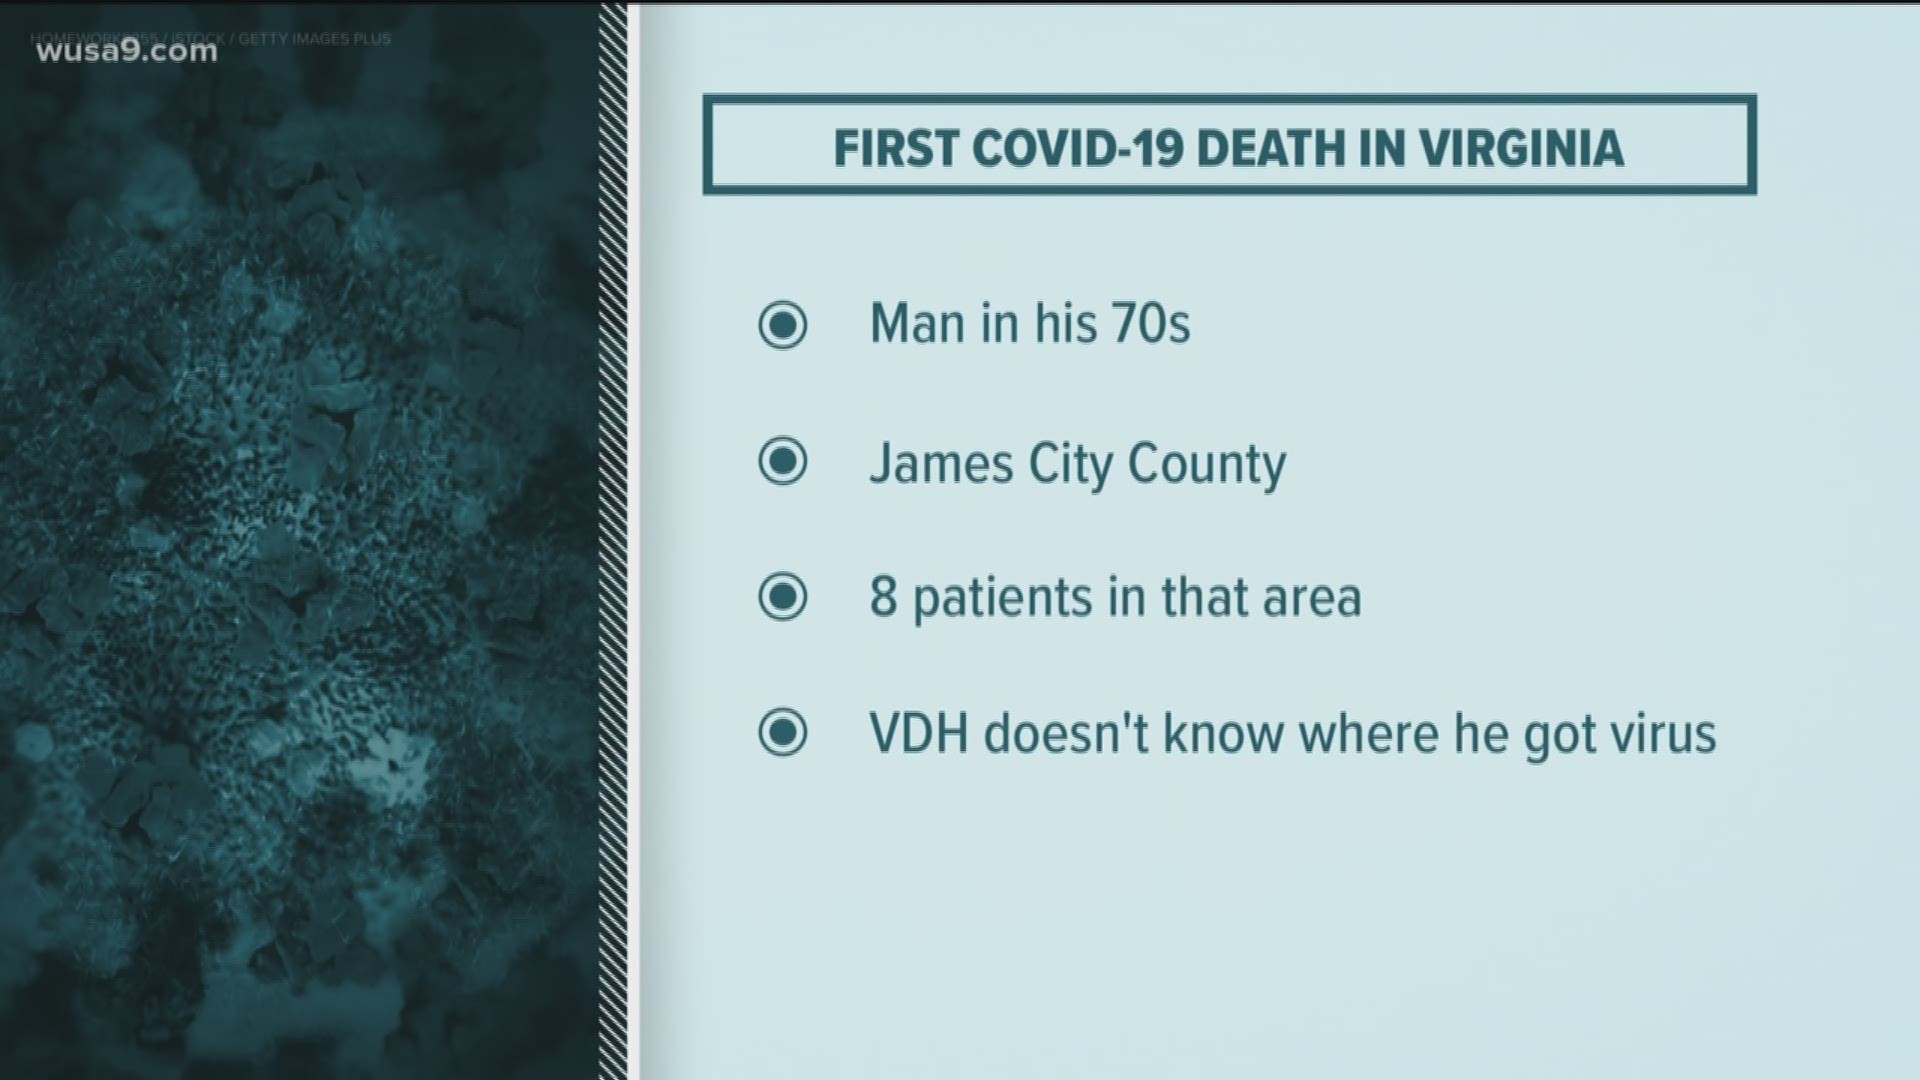 It was a man in his 70s who contracted the virus through an unknown source. The cause of death was respiratory failure as a result of coronavirus.